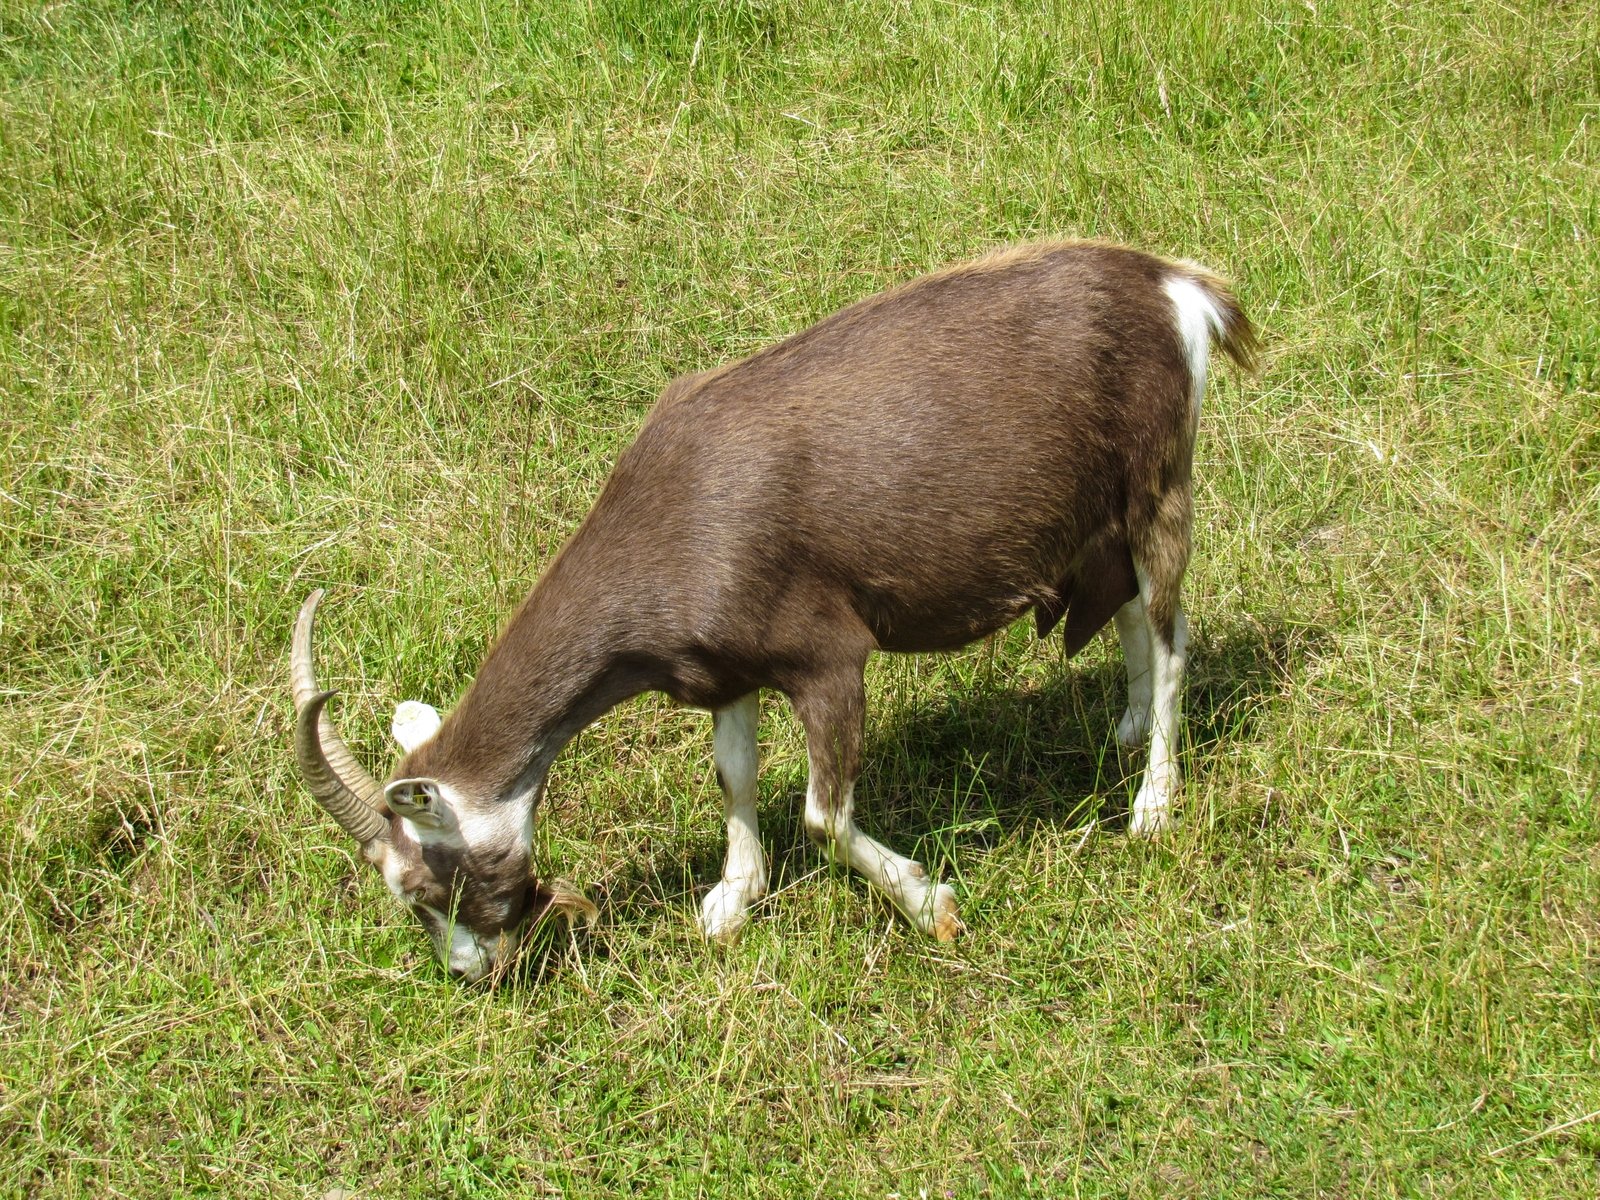 a goat is grazing in the field on short grass